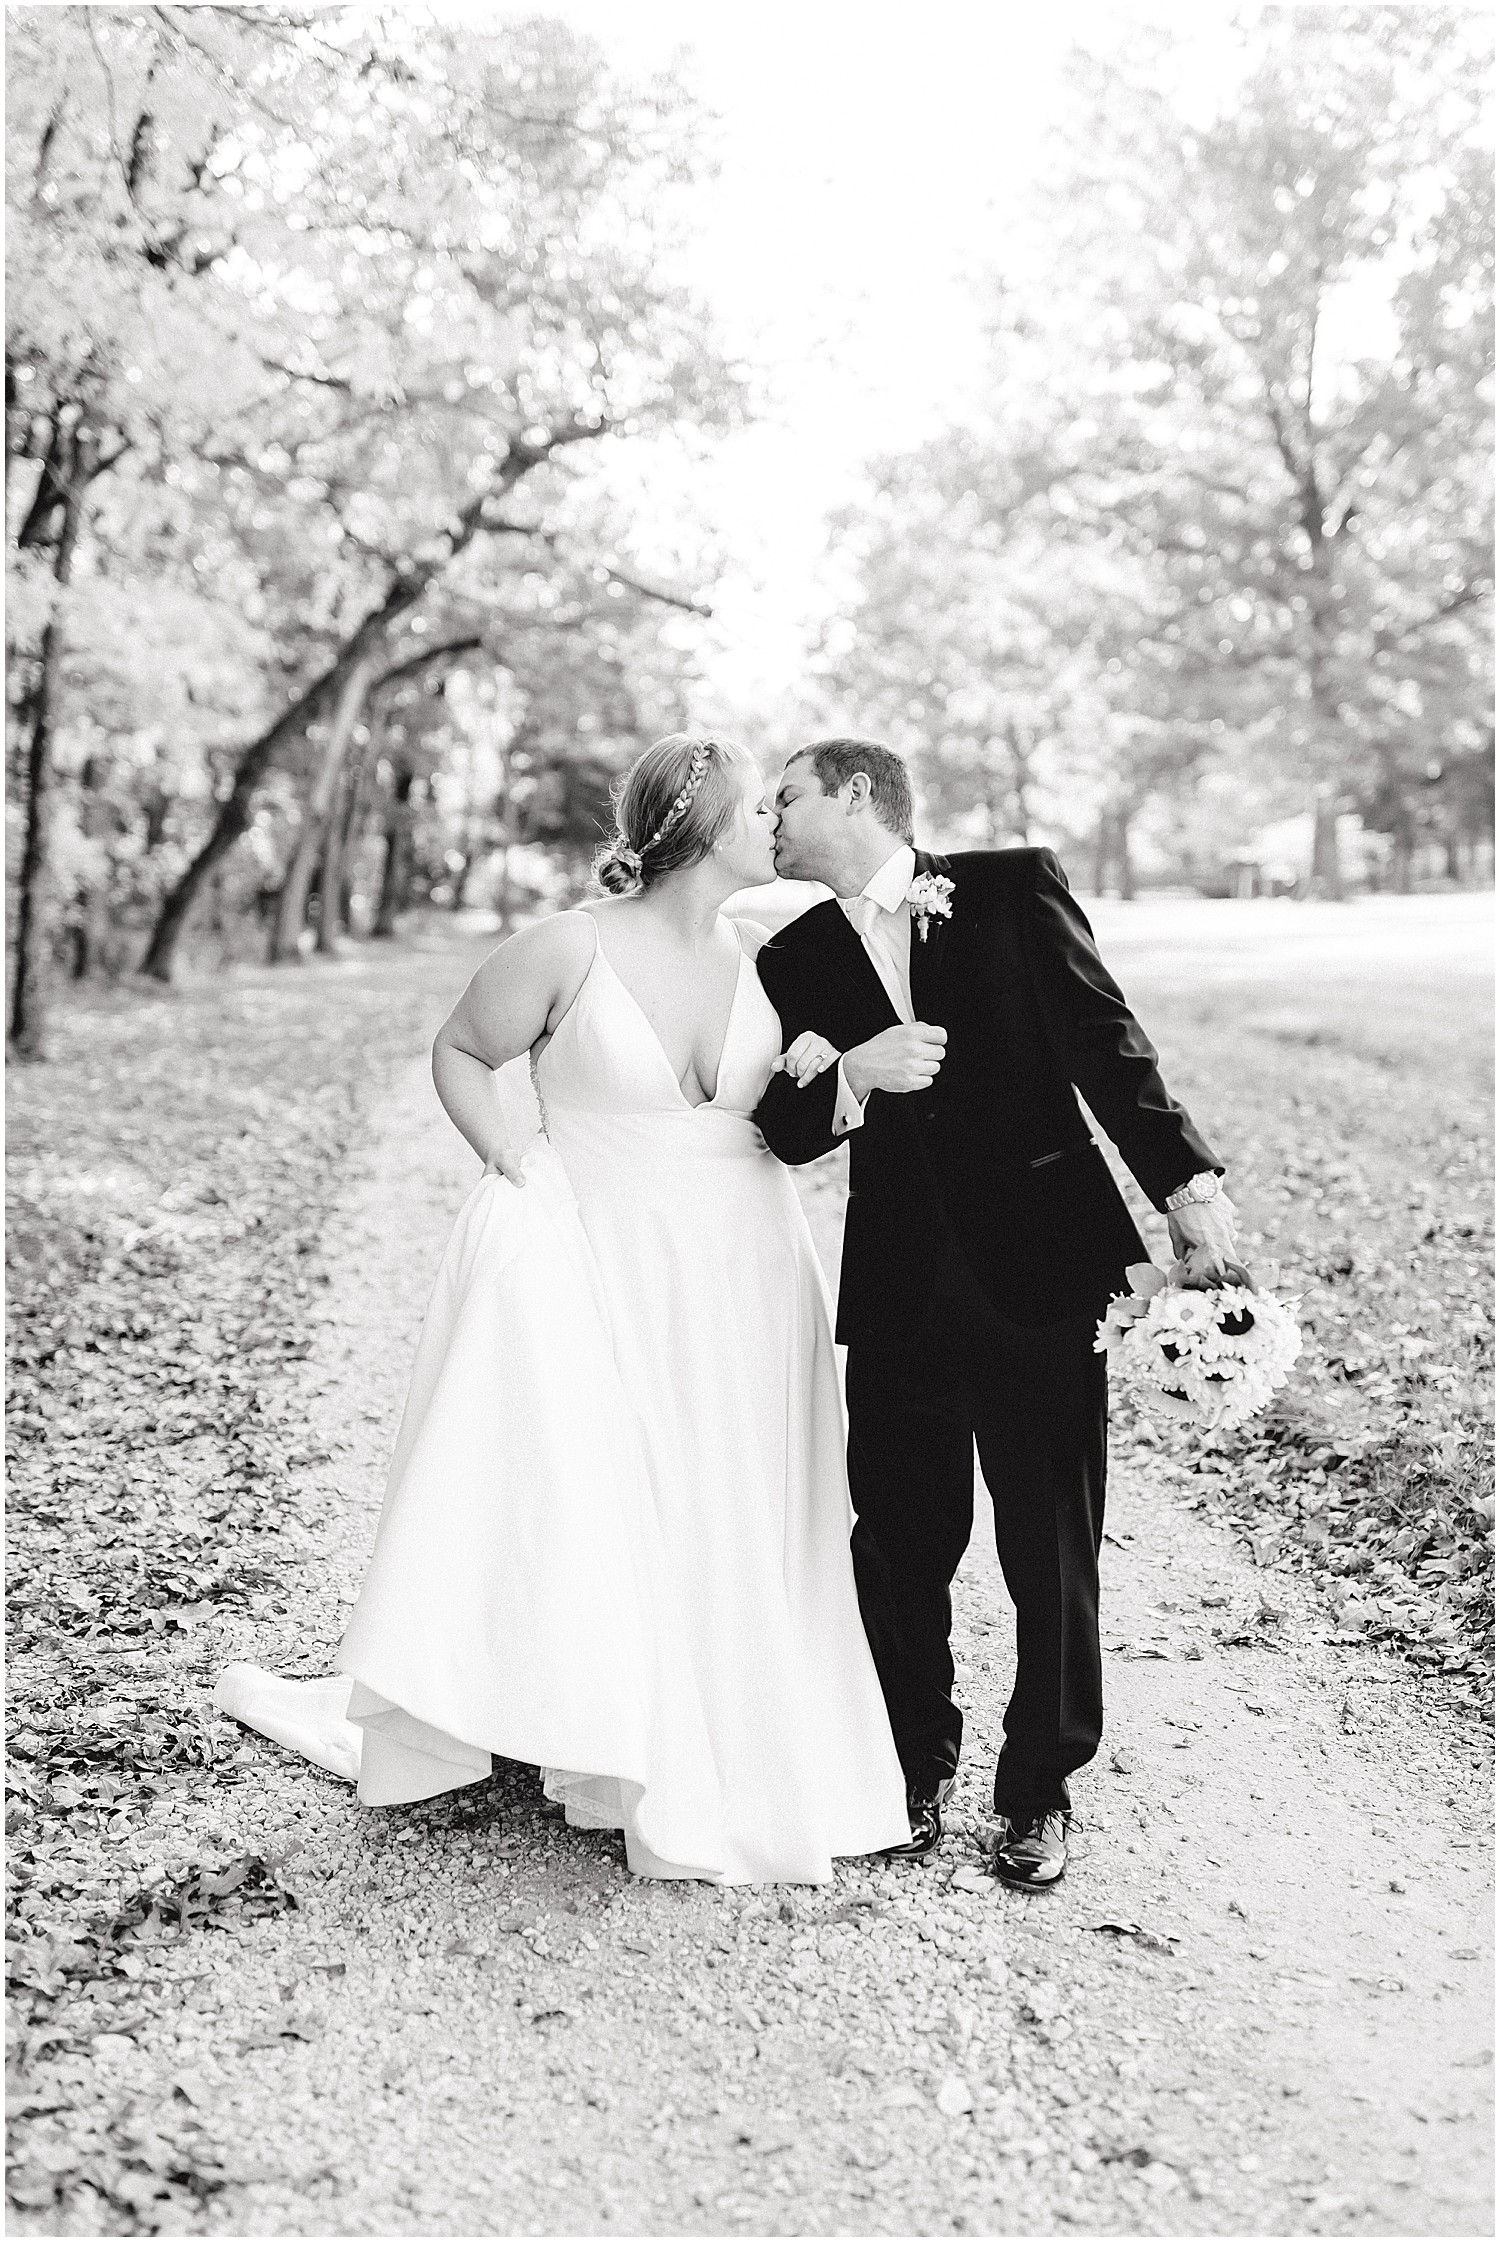 black and white image of bride and groom kissing while they walk on gravel drive under trees on wedding day